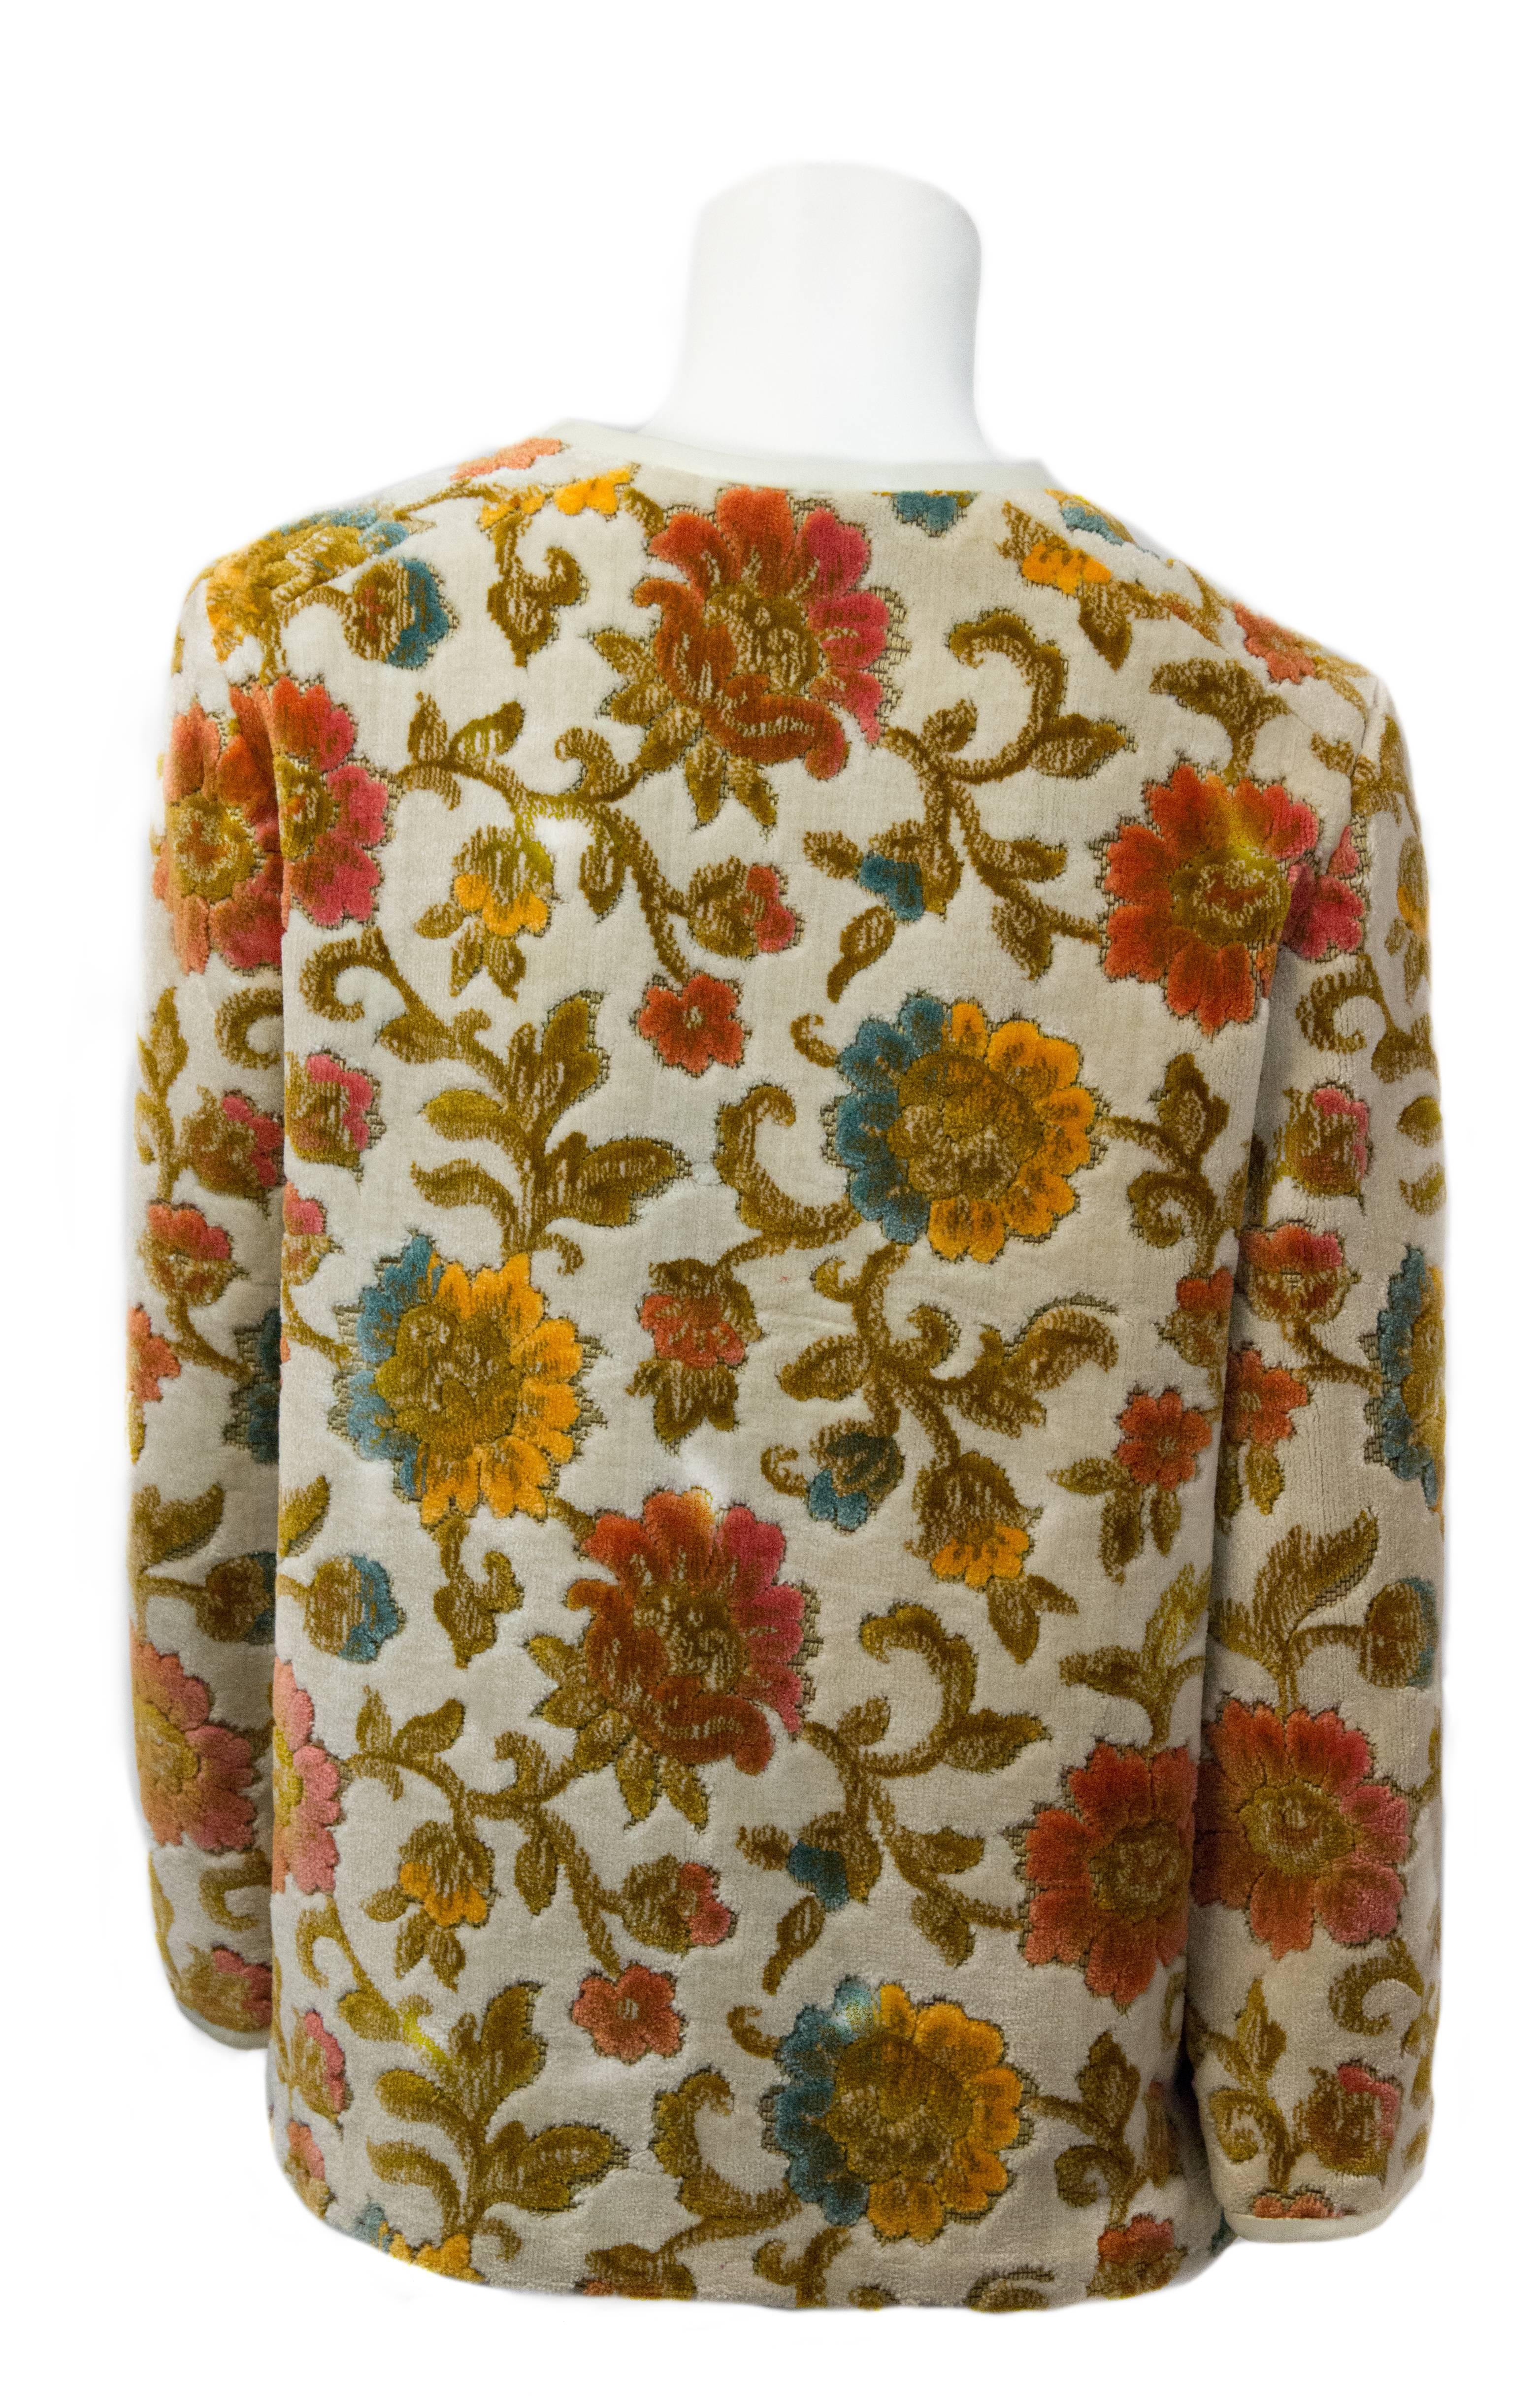 60s floral tapestry jacket with white leather trim. Metal zipper up the front with leather tassel zipper pull. Shallow front pockets. Lined in satin. 